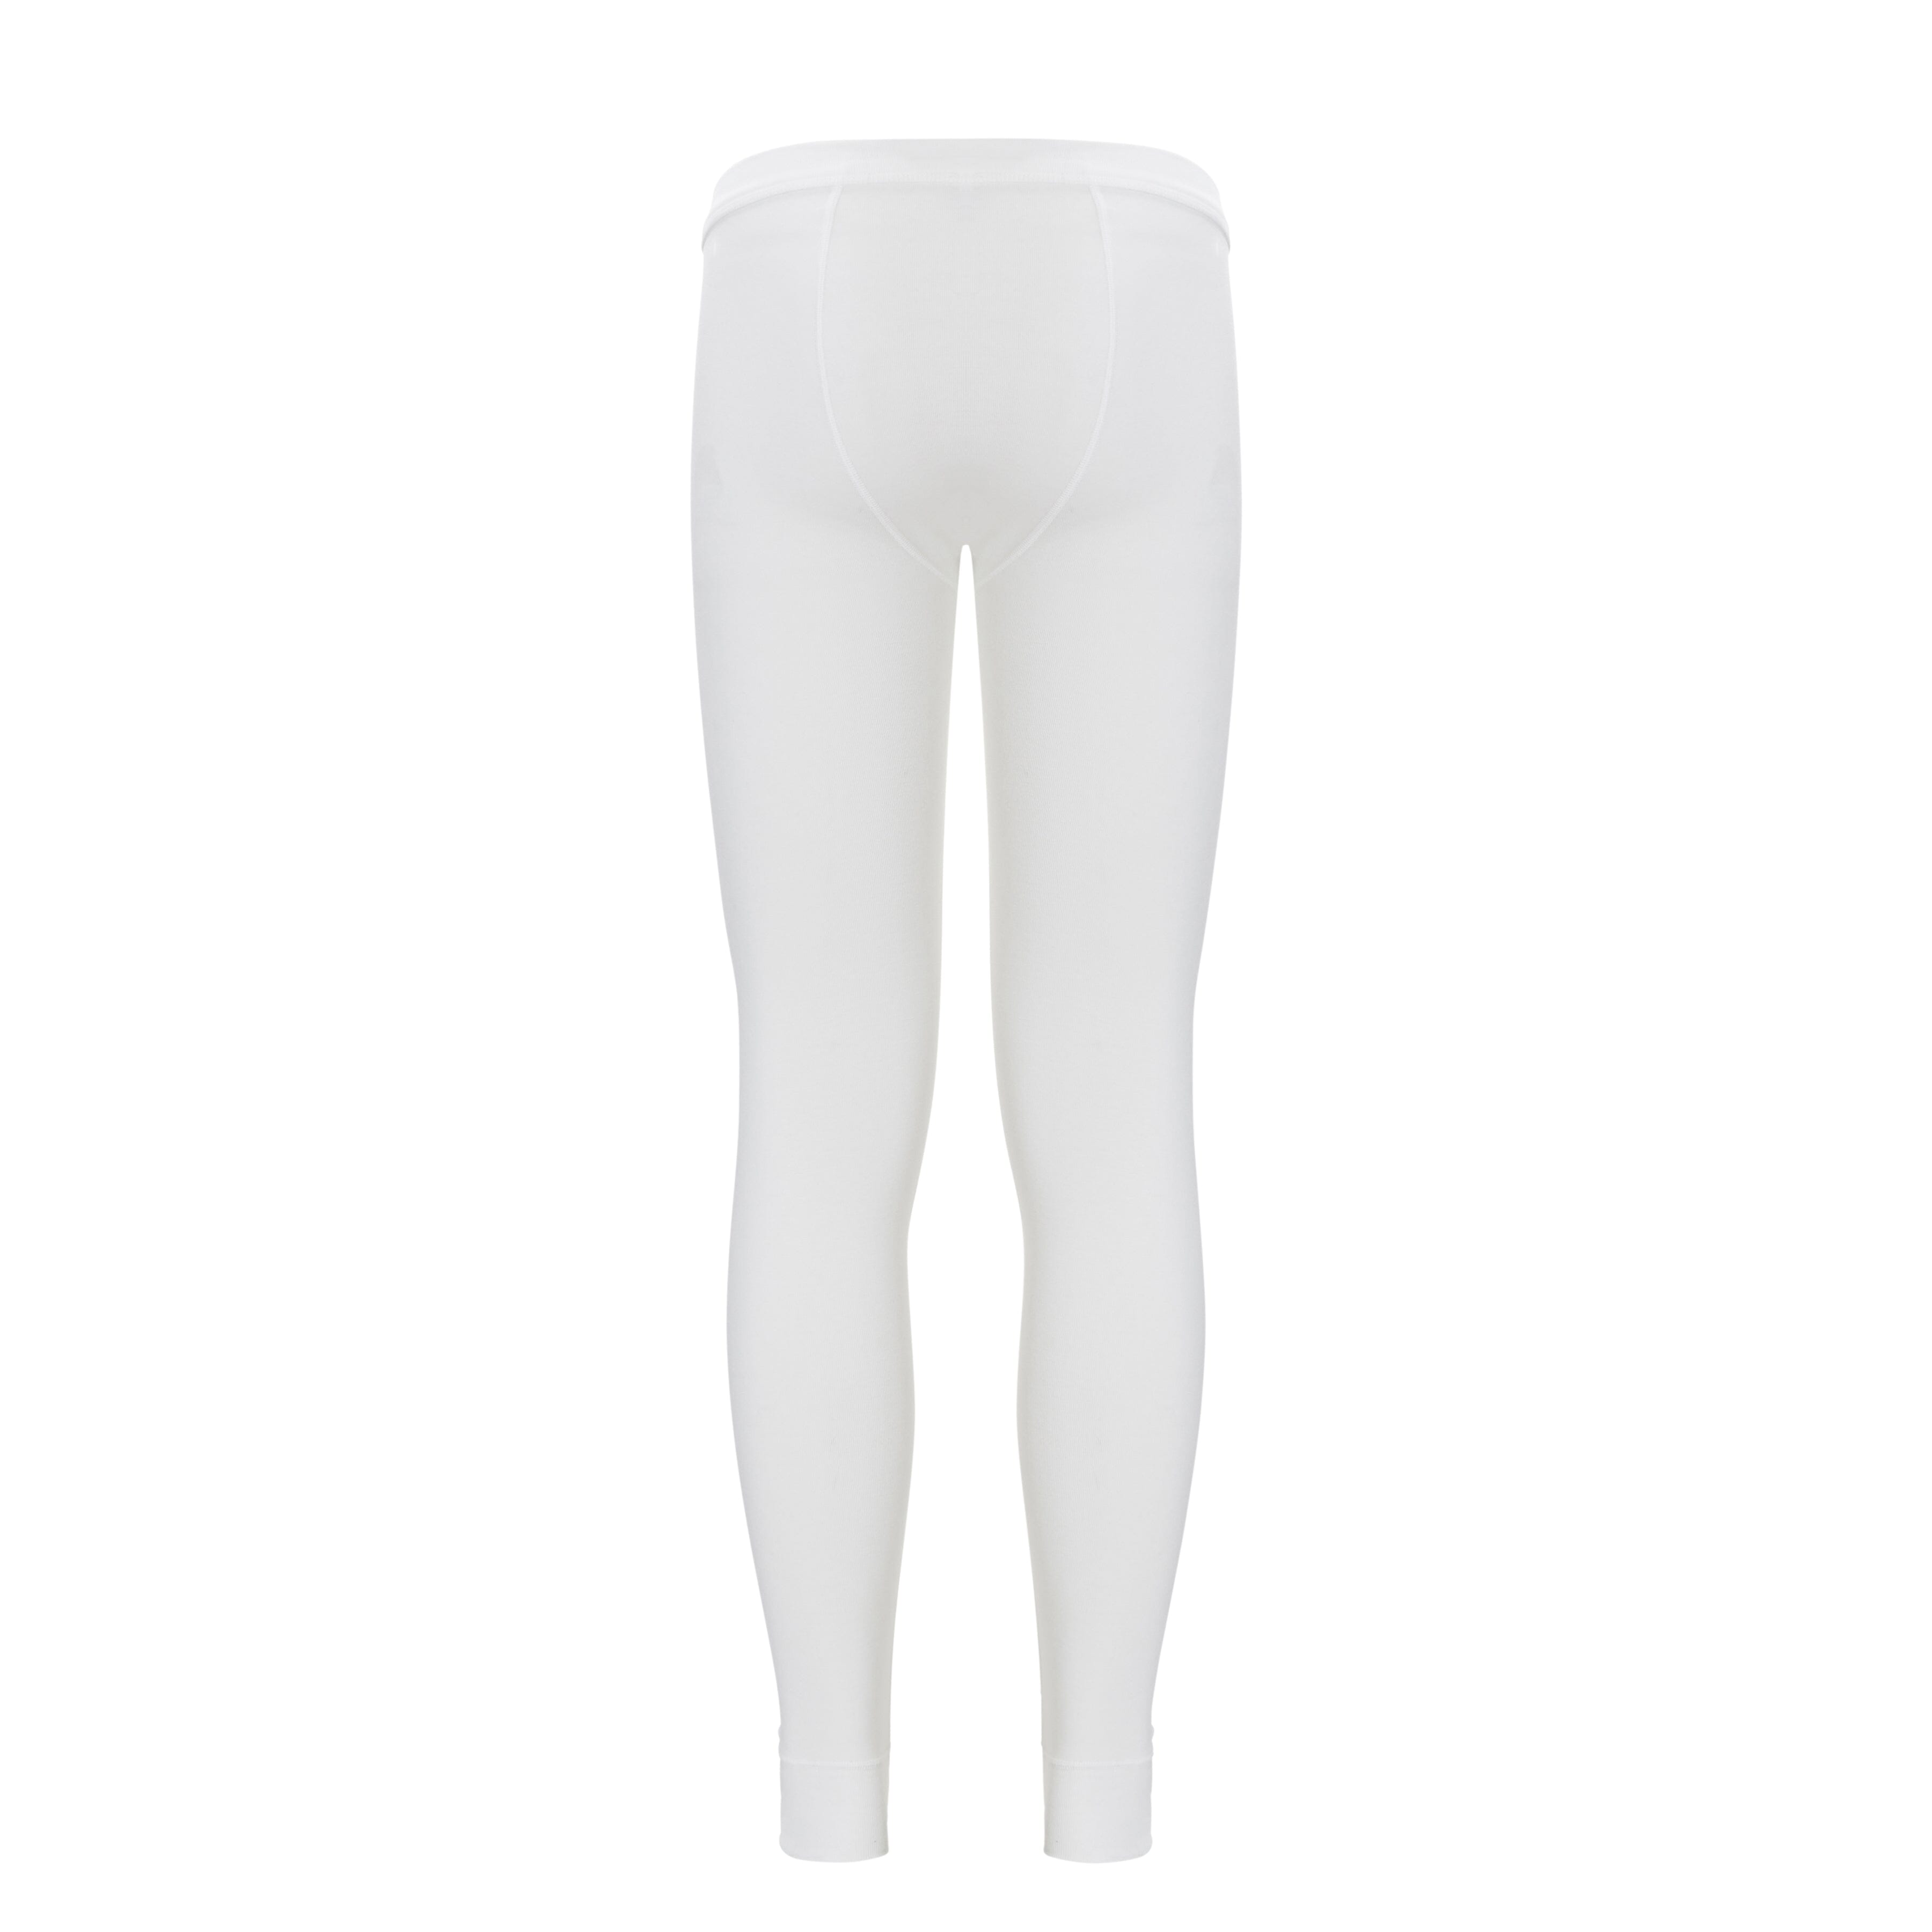 Ten Cate - 30245 - Thermo Pants Heren - Snow White Thermo Ondergoed Ten Cate 